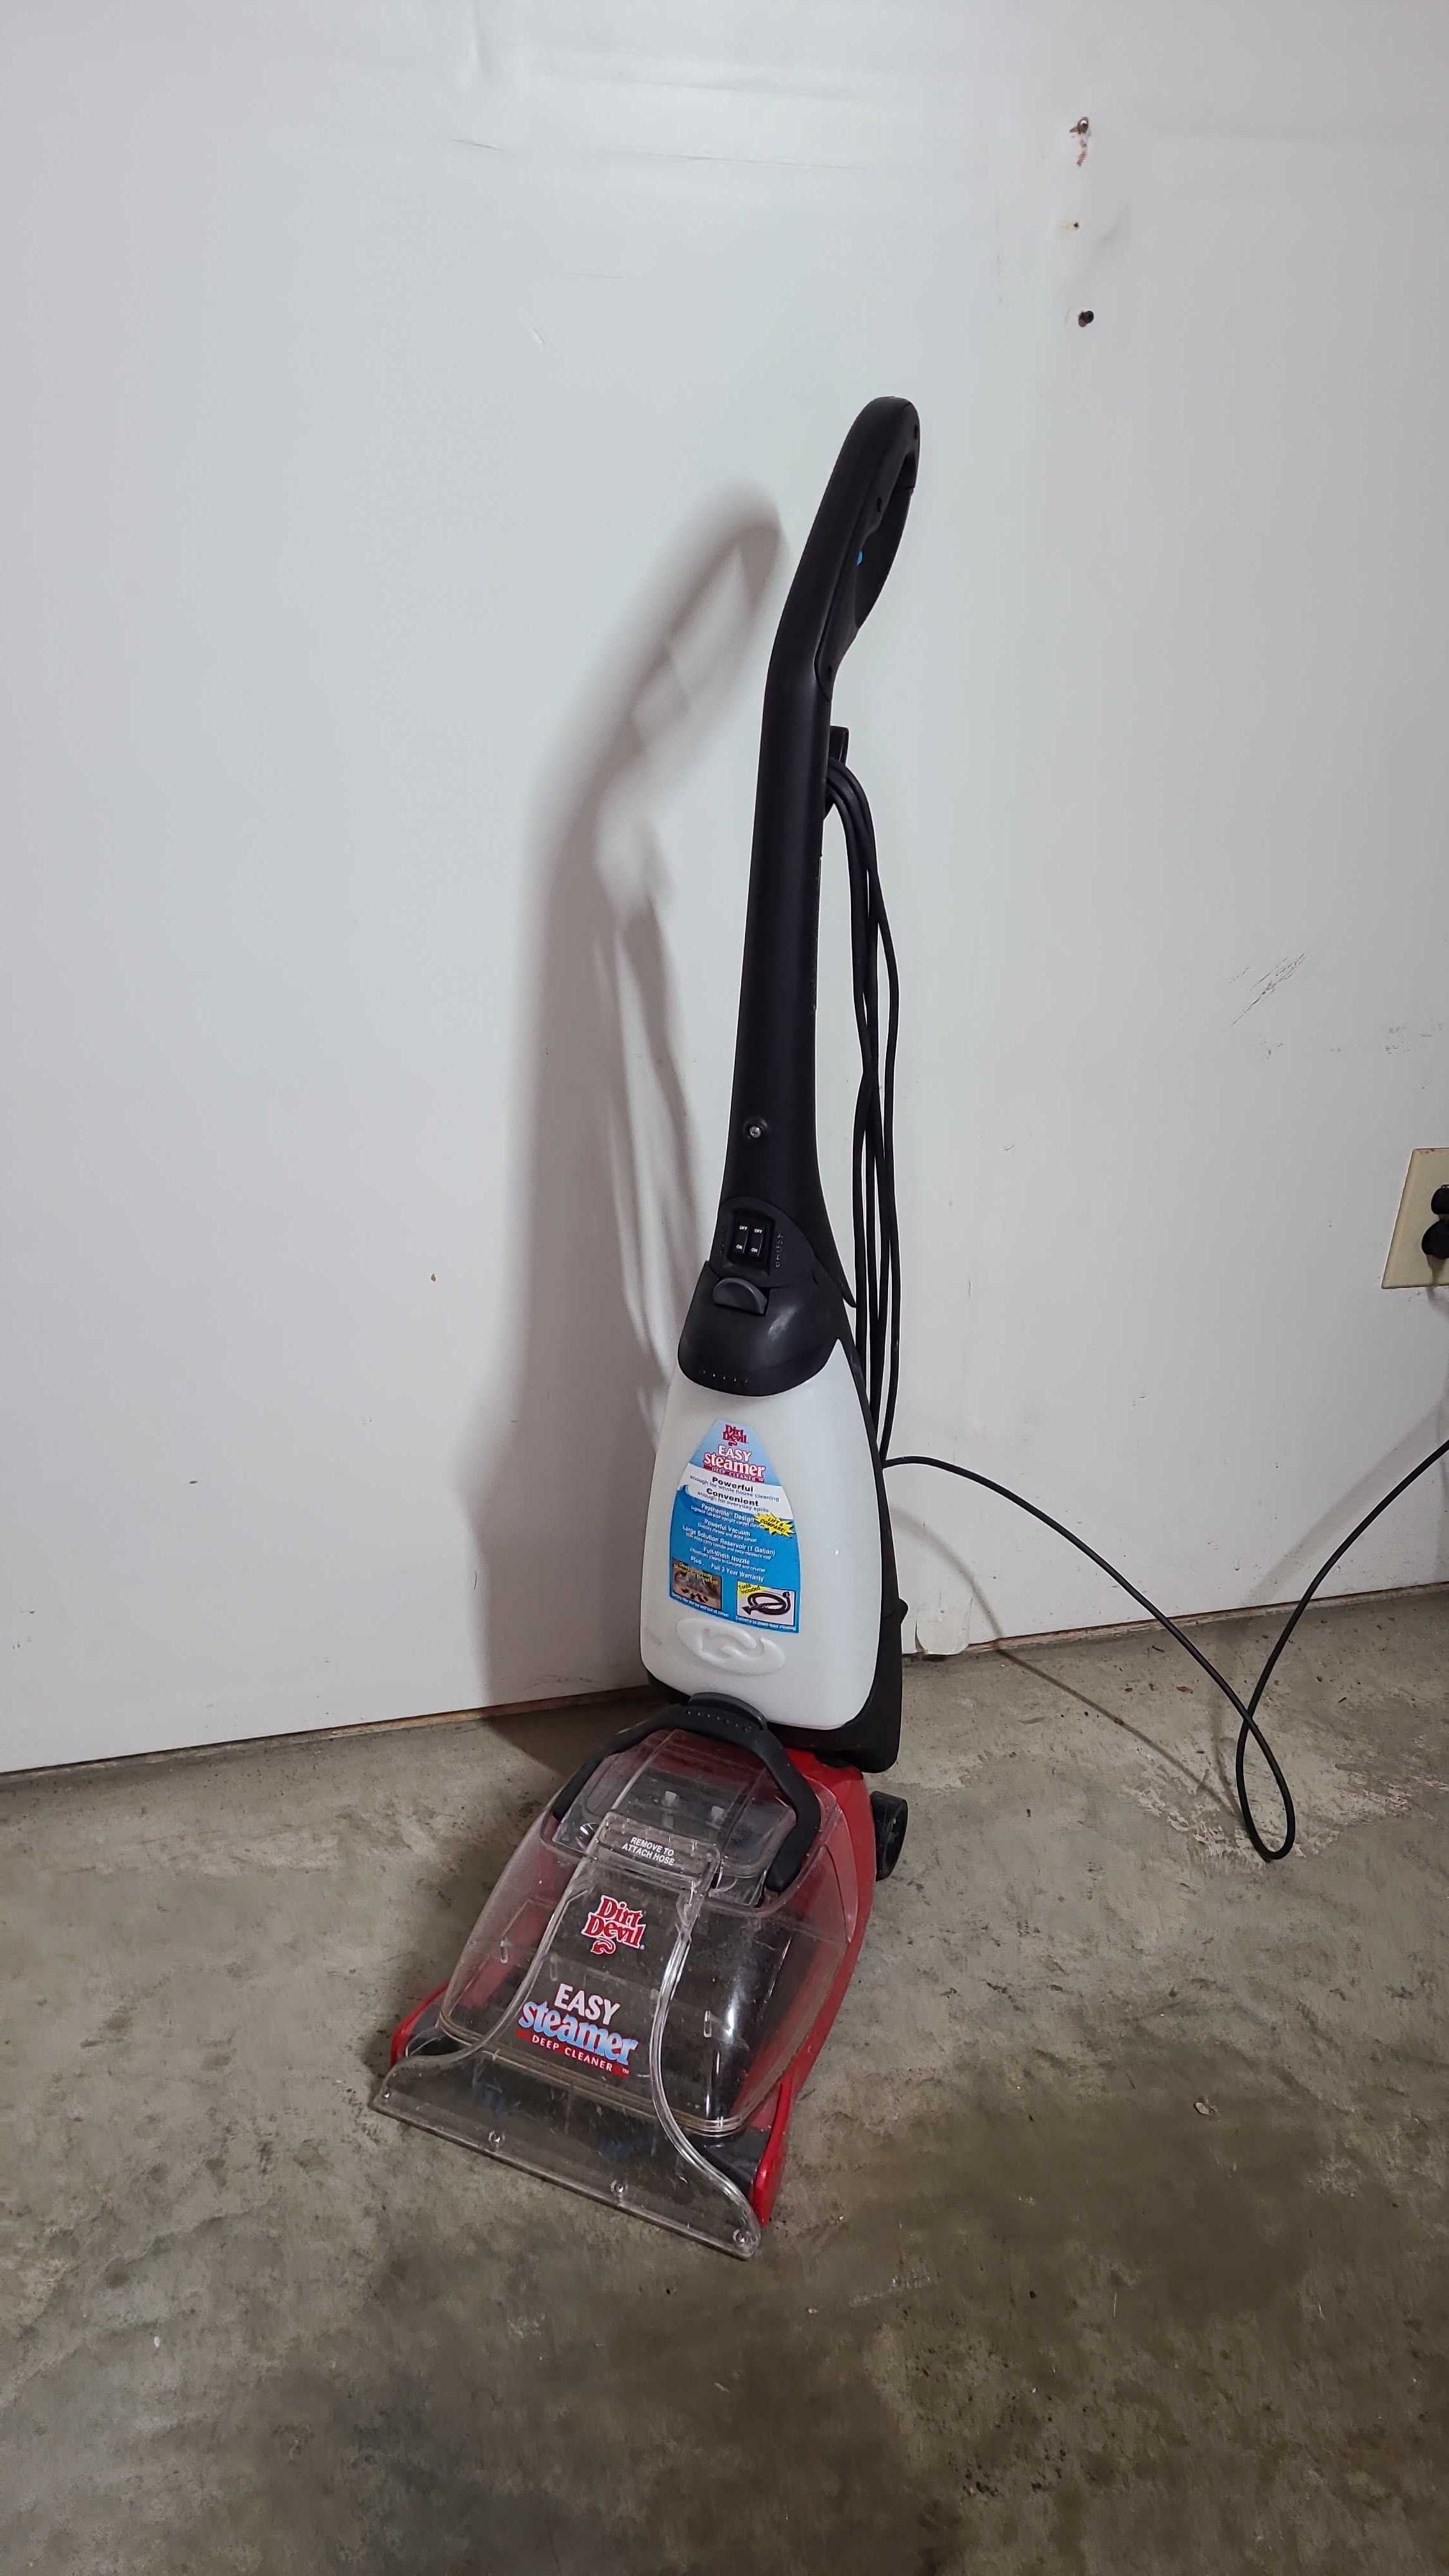 DIRT DEVIL EASY STEAMER CARPET CLEANER (WHAT'S WRONG WITH IT?) 